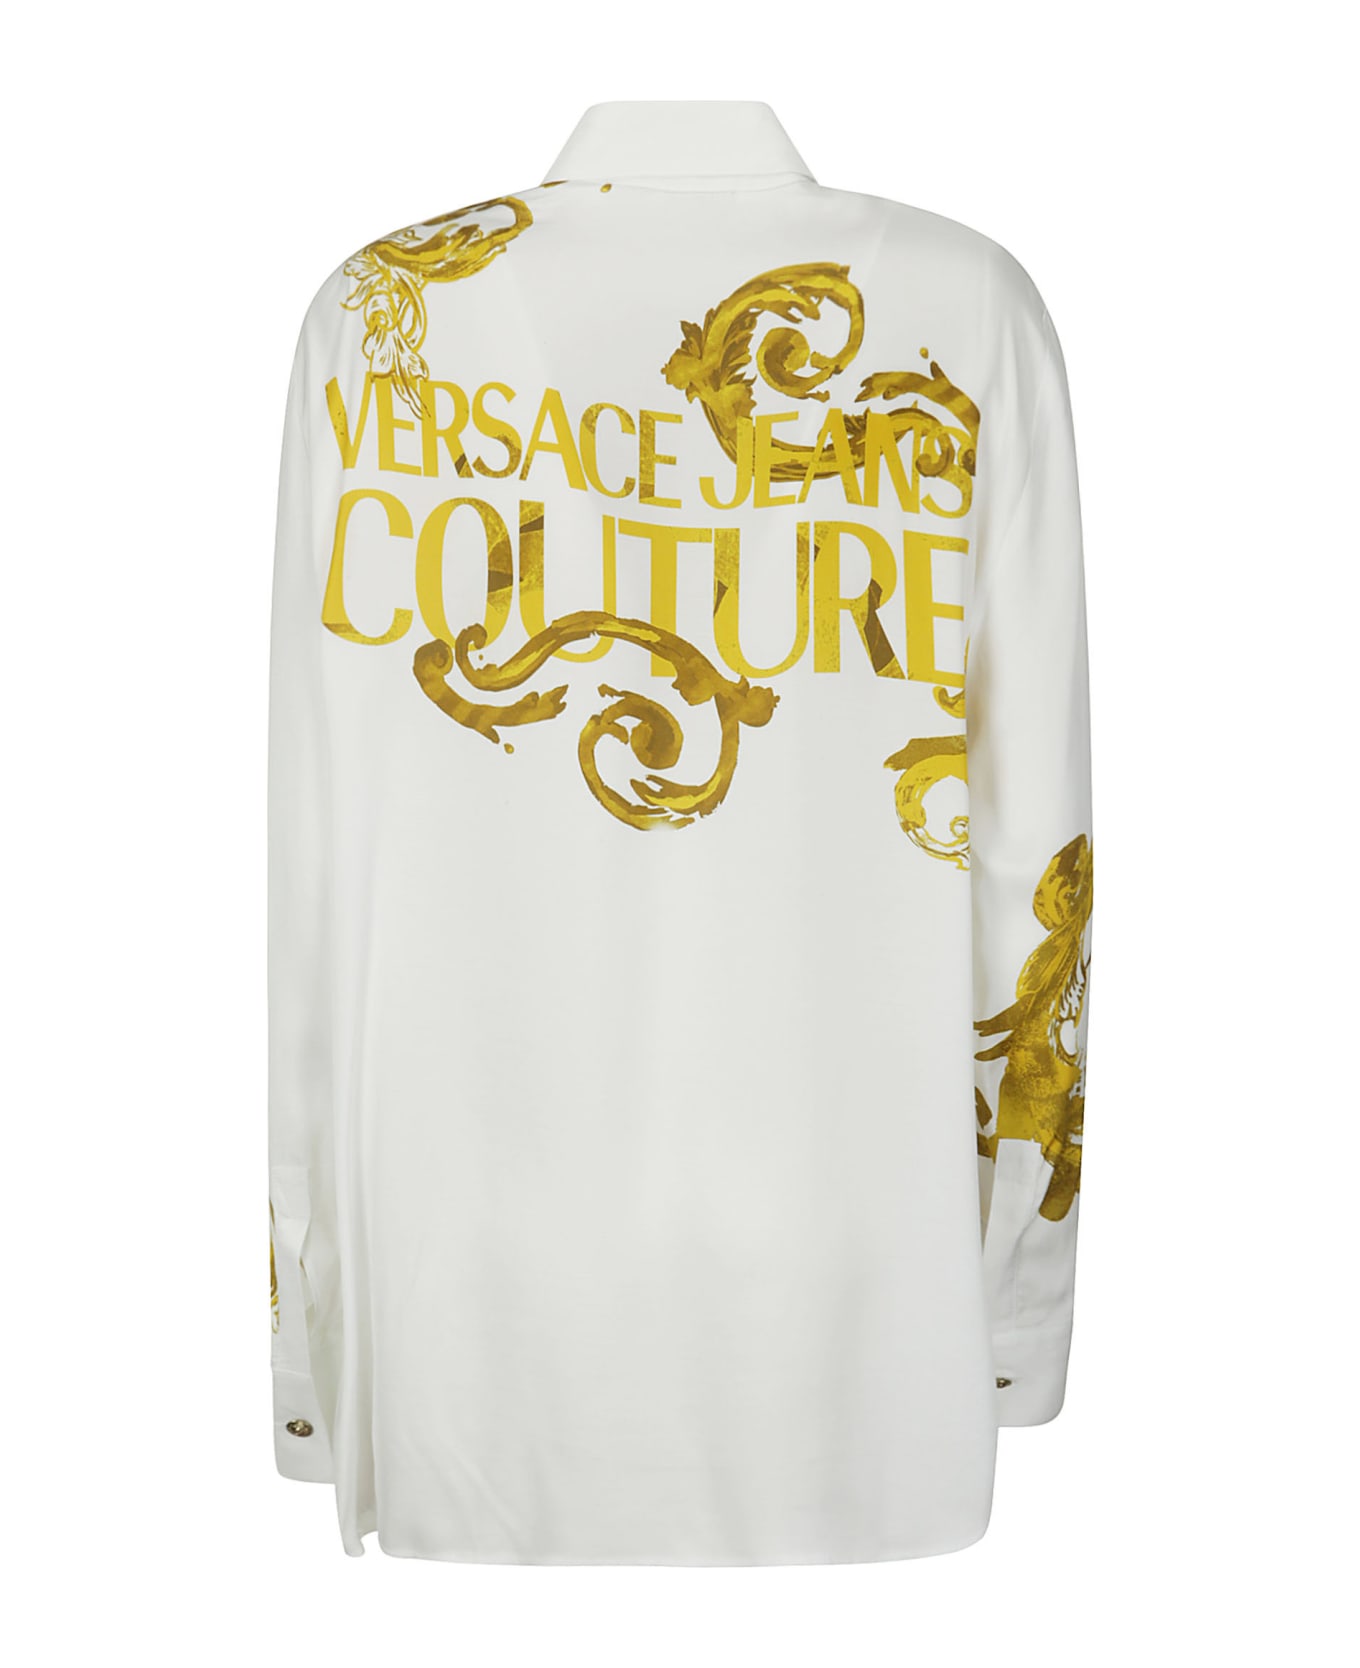 Versace Jeans Couture Barocco Printed Long-sleeved Shirt - WHITE/GOLD